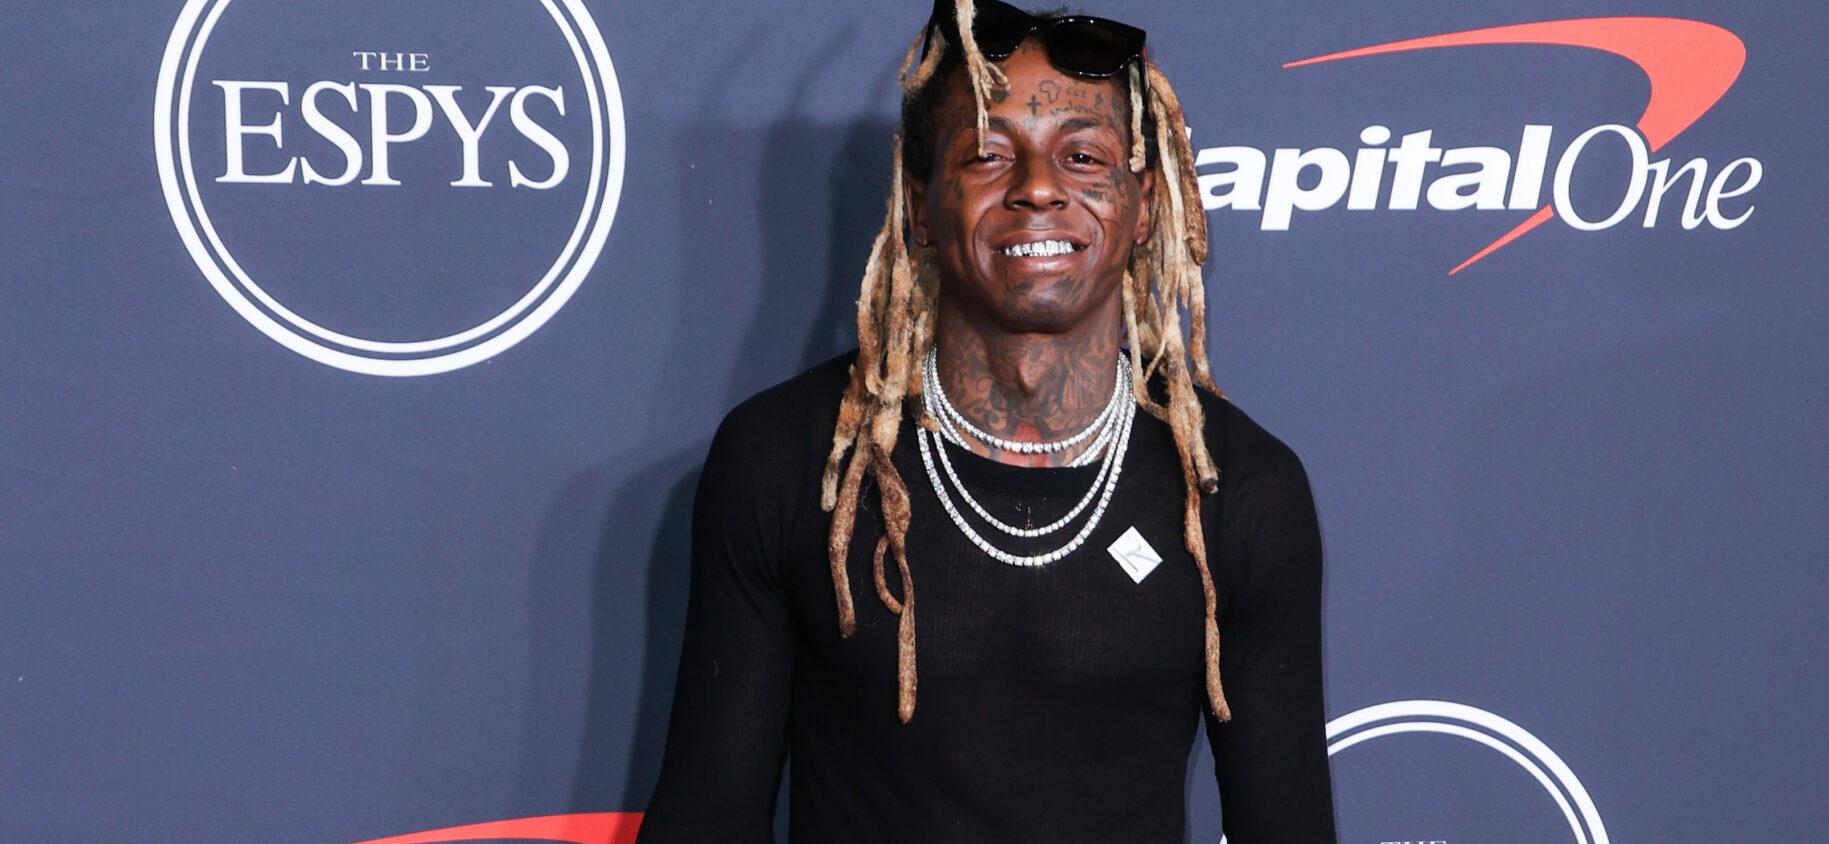 Rapper Lil' Wayne Sued By His Former Private Chef For Discrimination